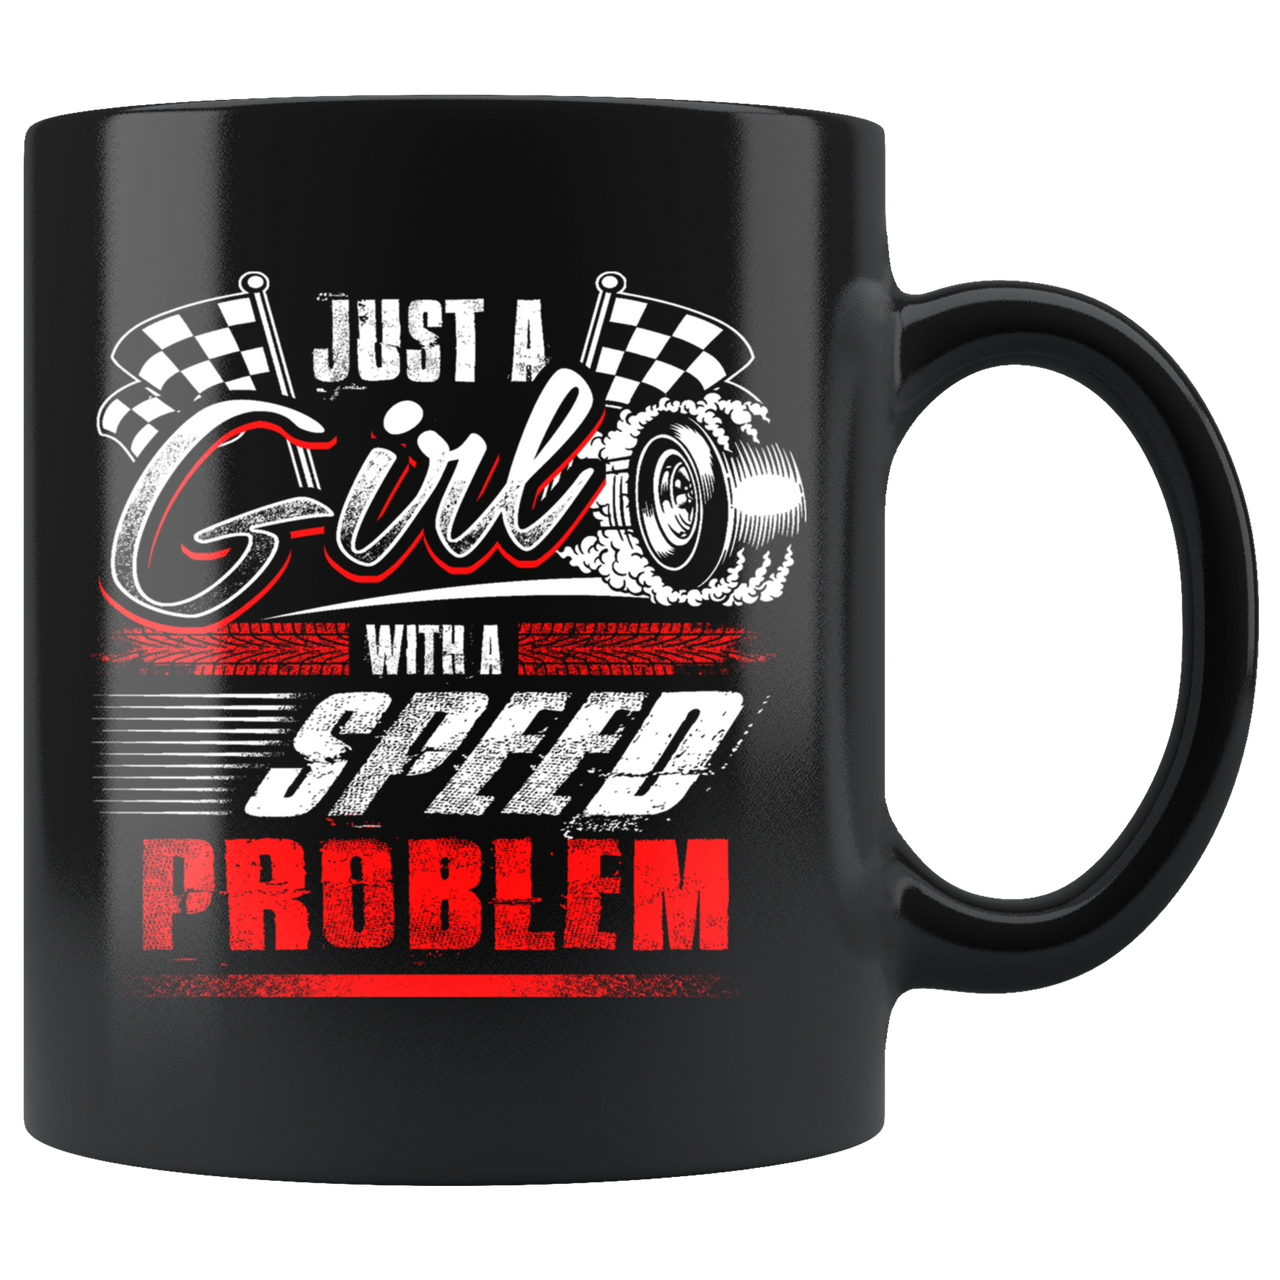 Just A Girl With A Speed Problem Mug!